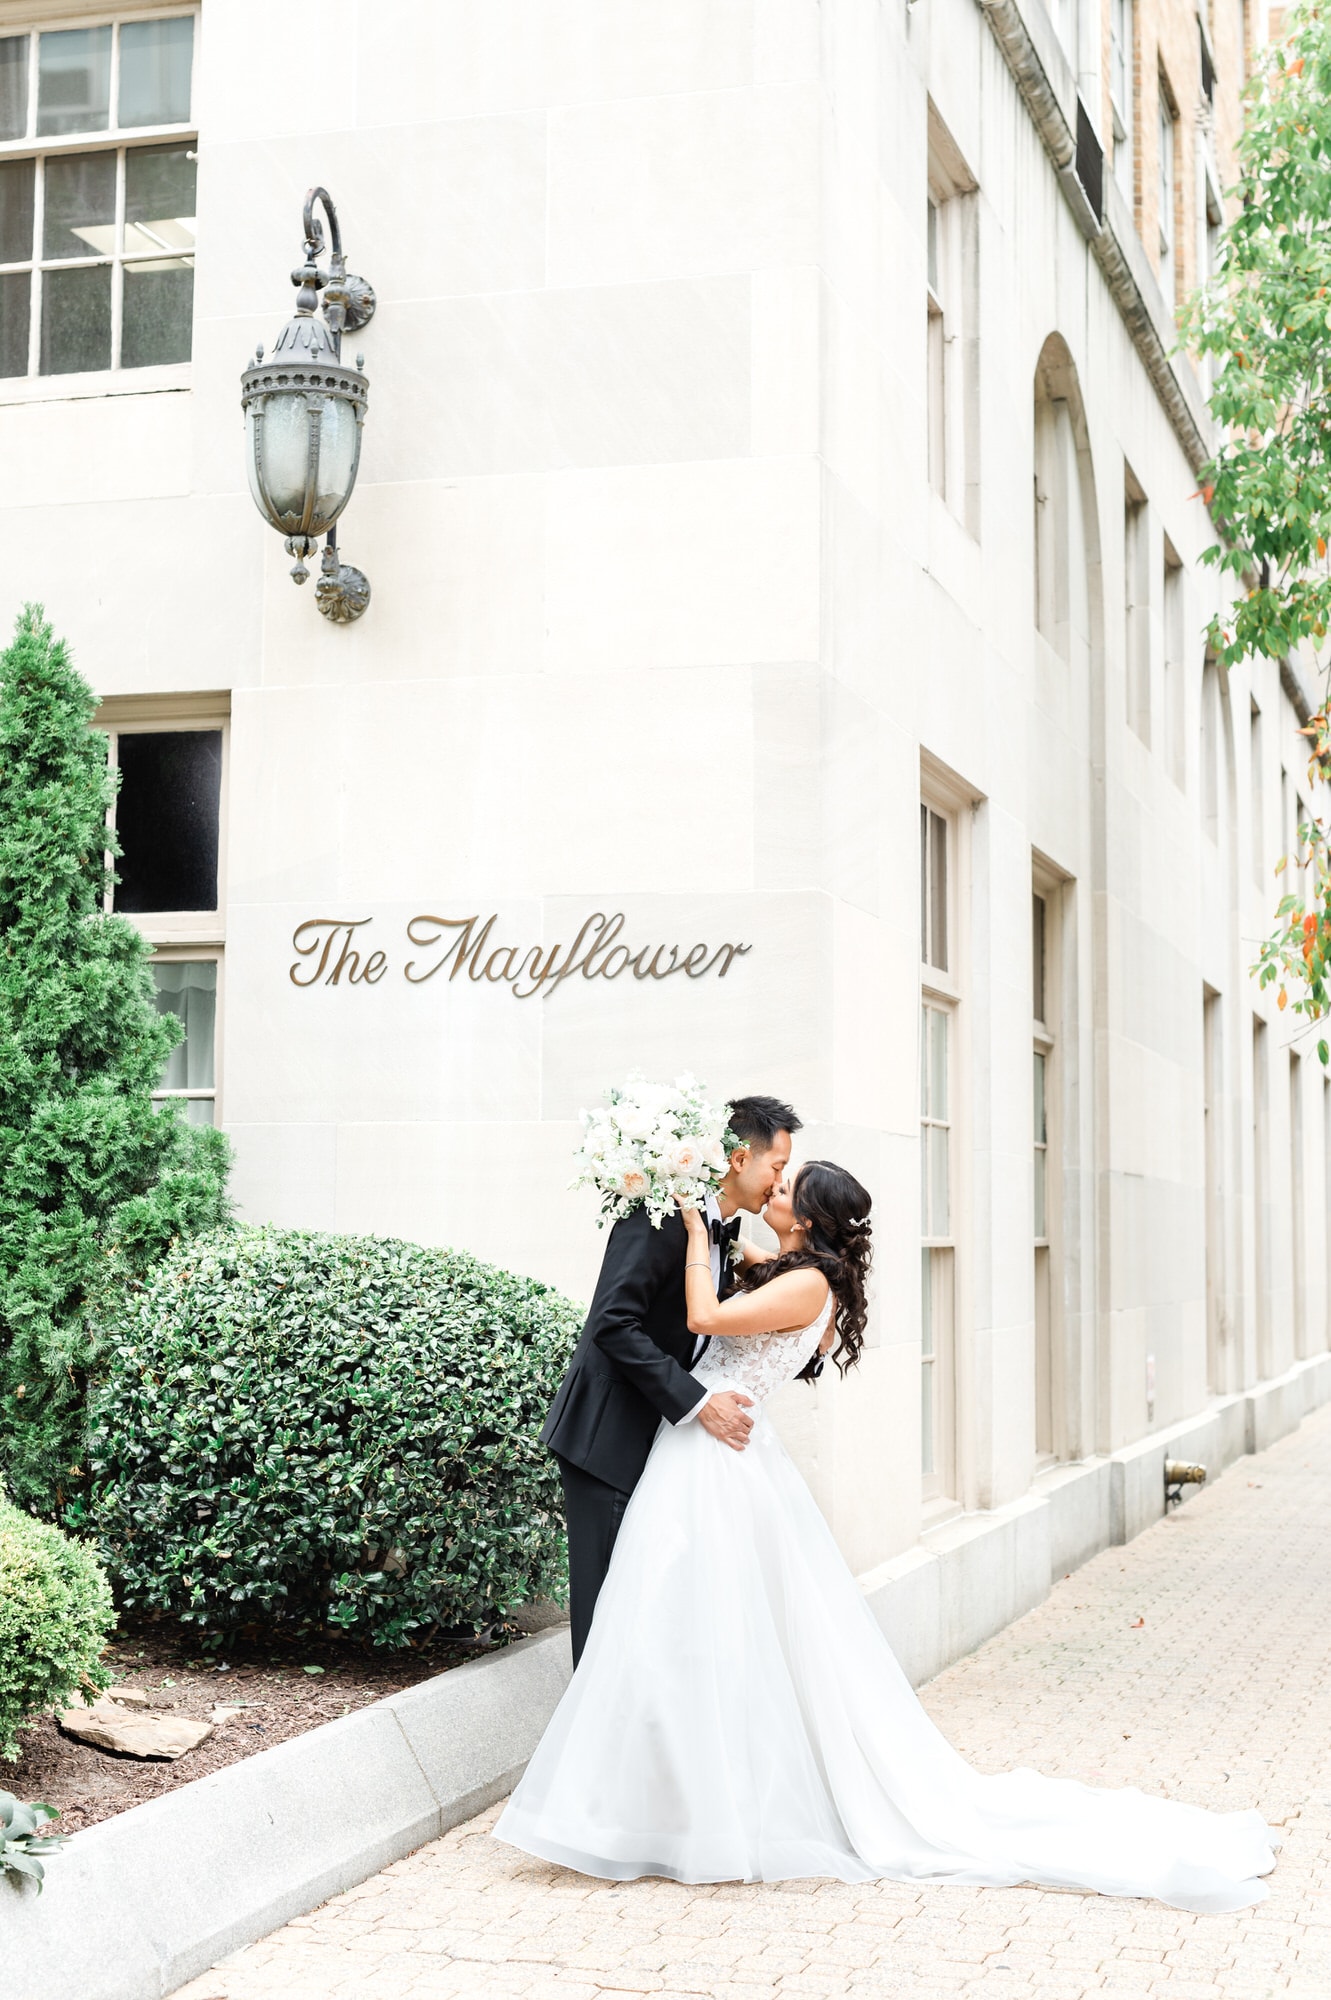 Mayflower Hotel DC Wedding couple standing outside on sidewalk kissing with the Mayflower sign on the building in the background